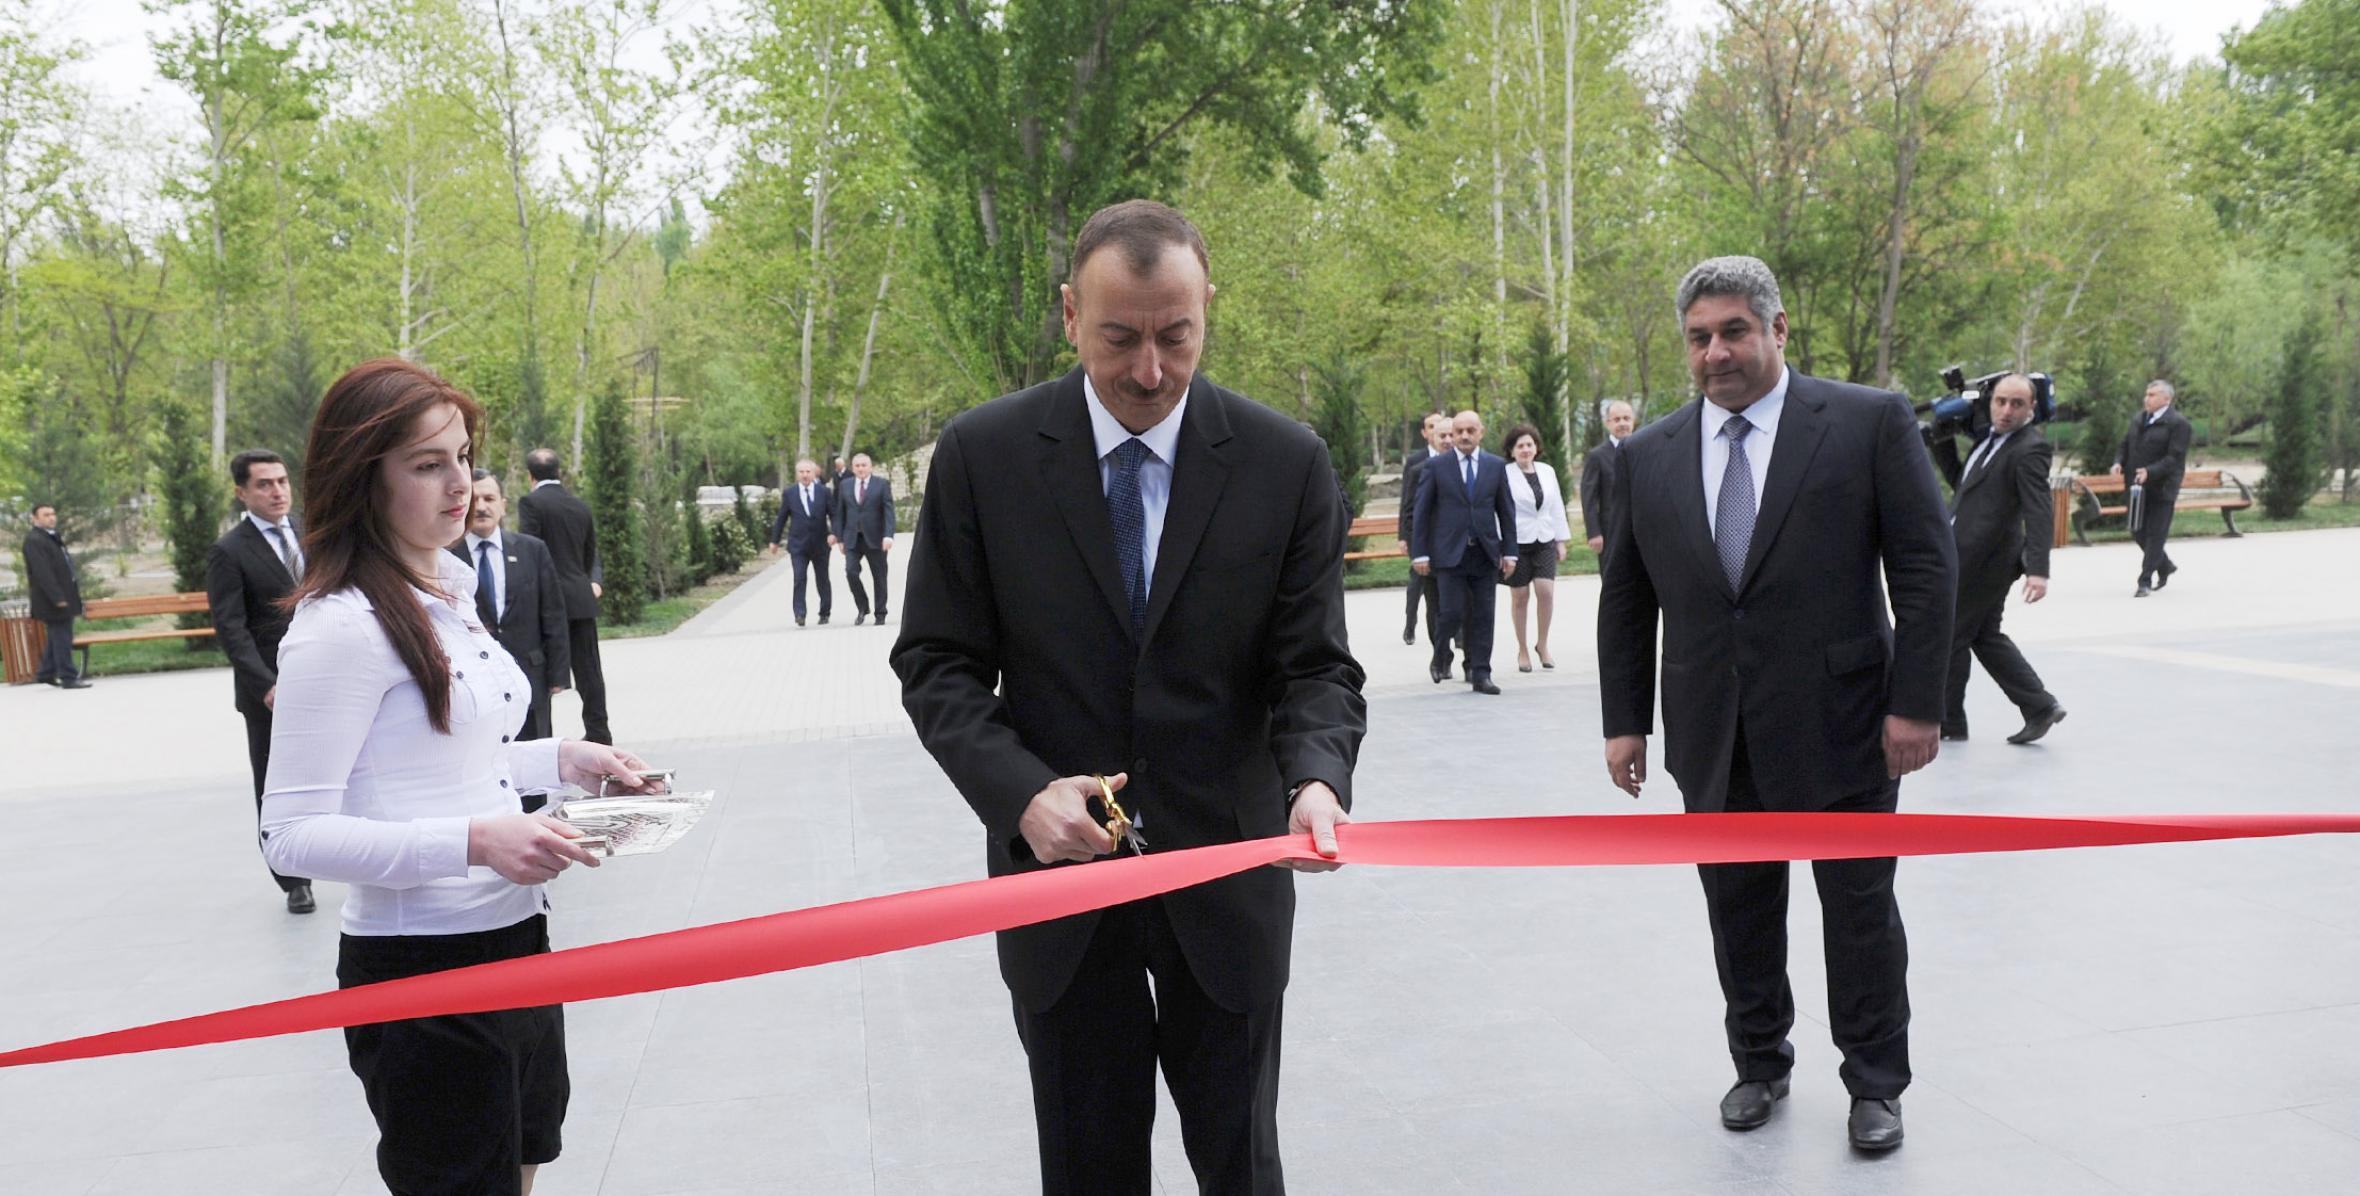 Ilham Aliyev attended the opening of the Youth House in Mingachevir